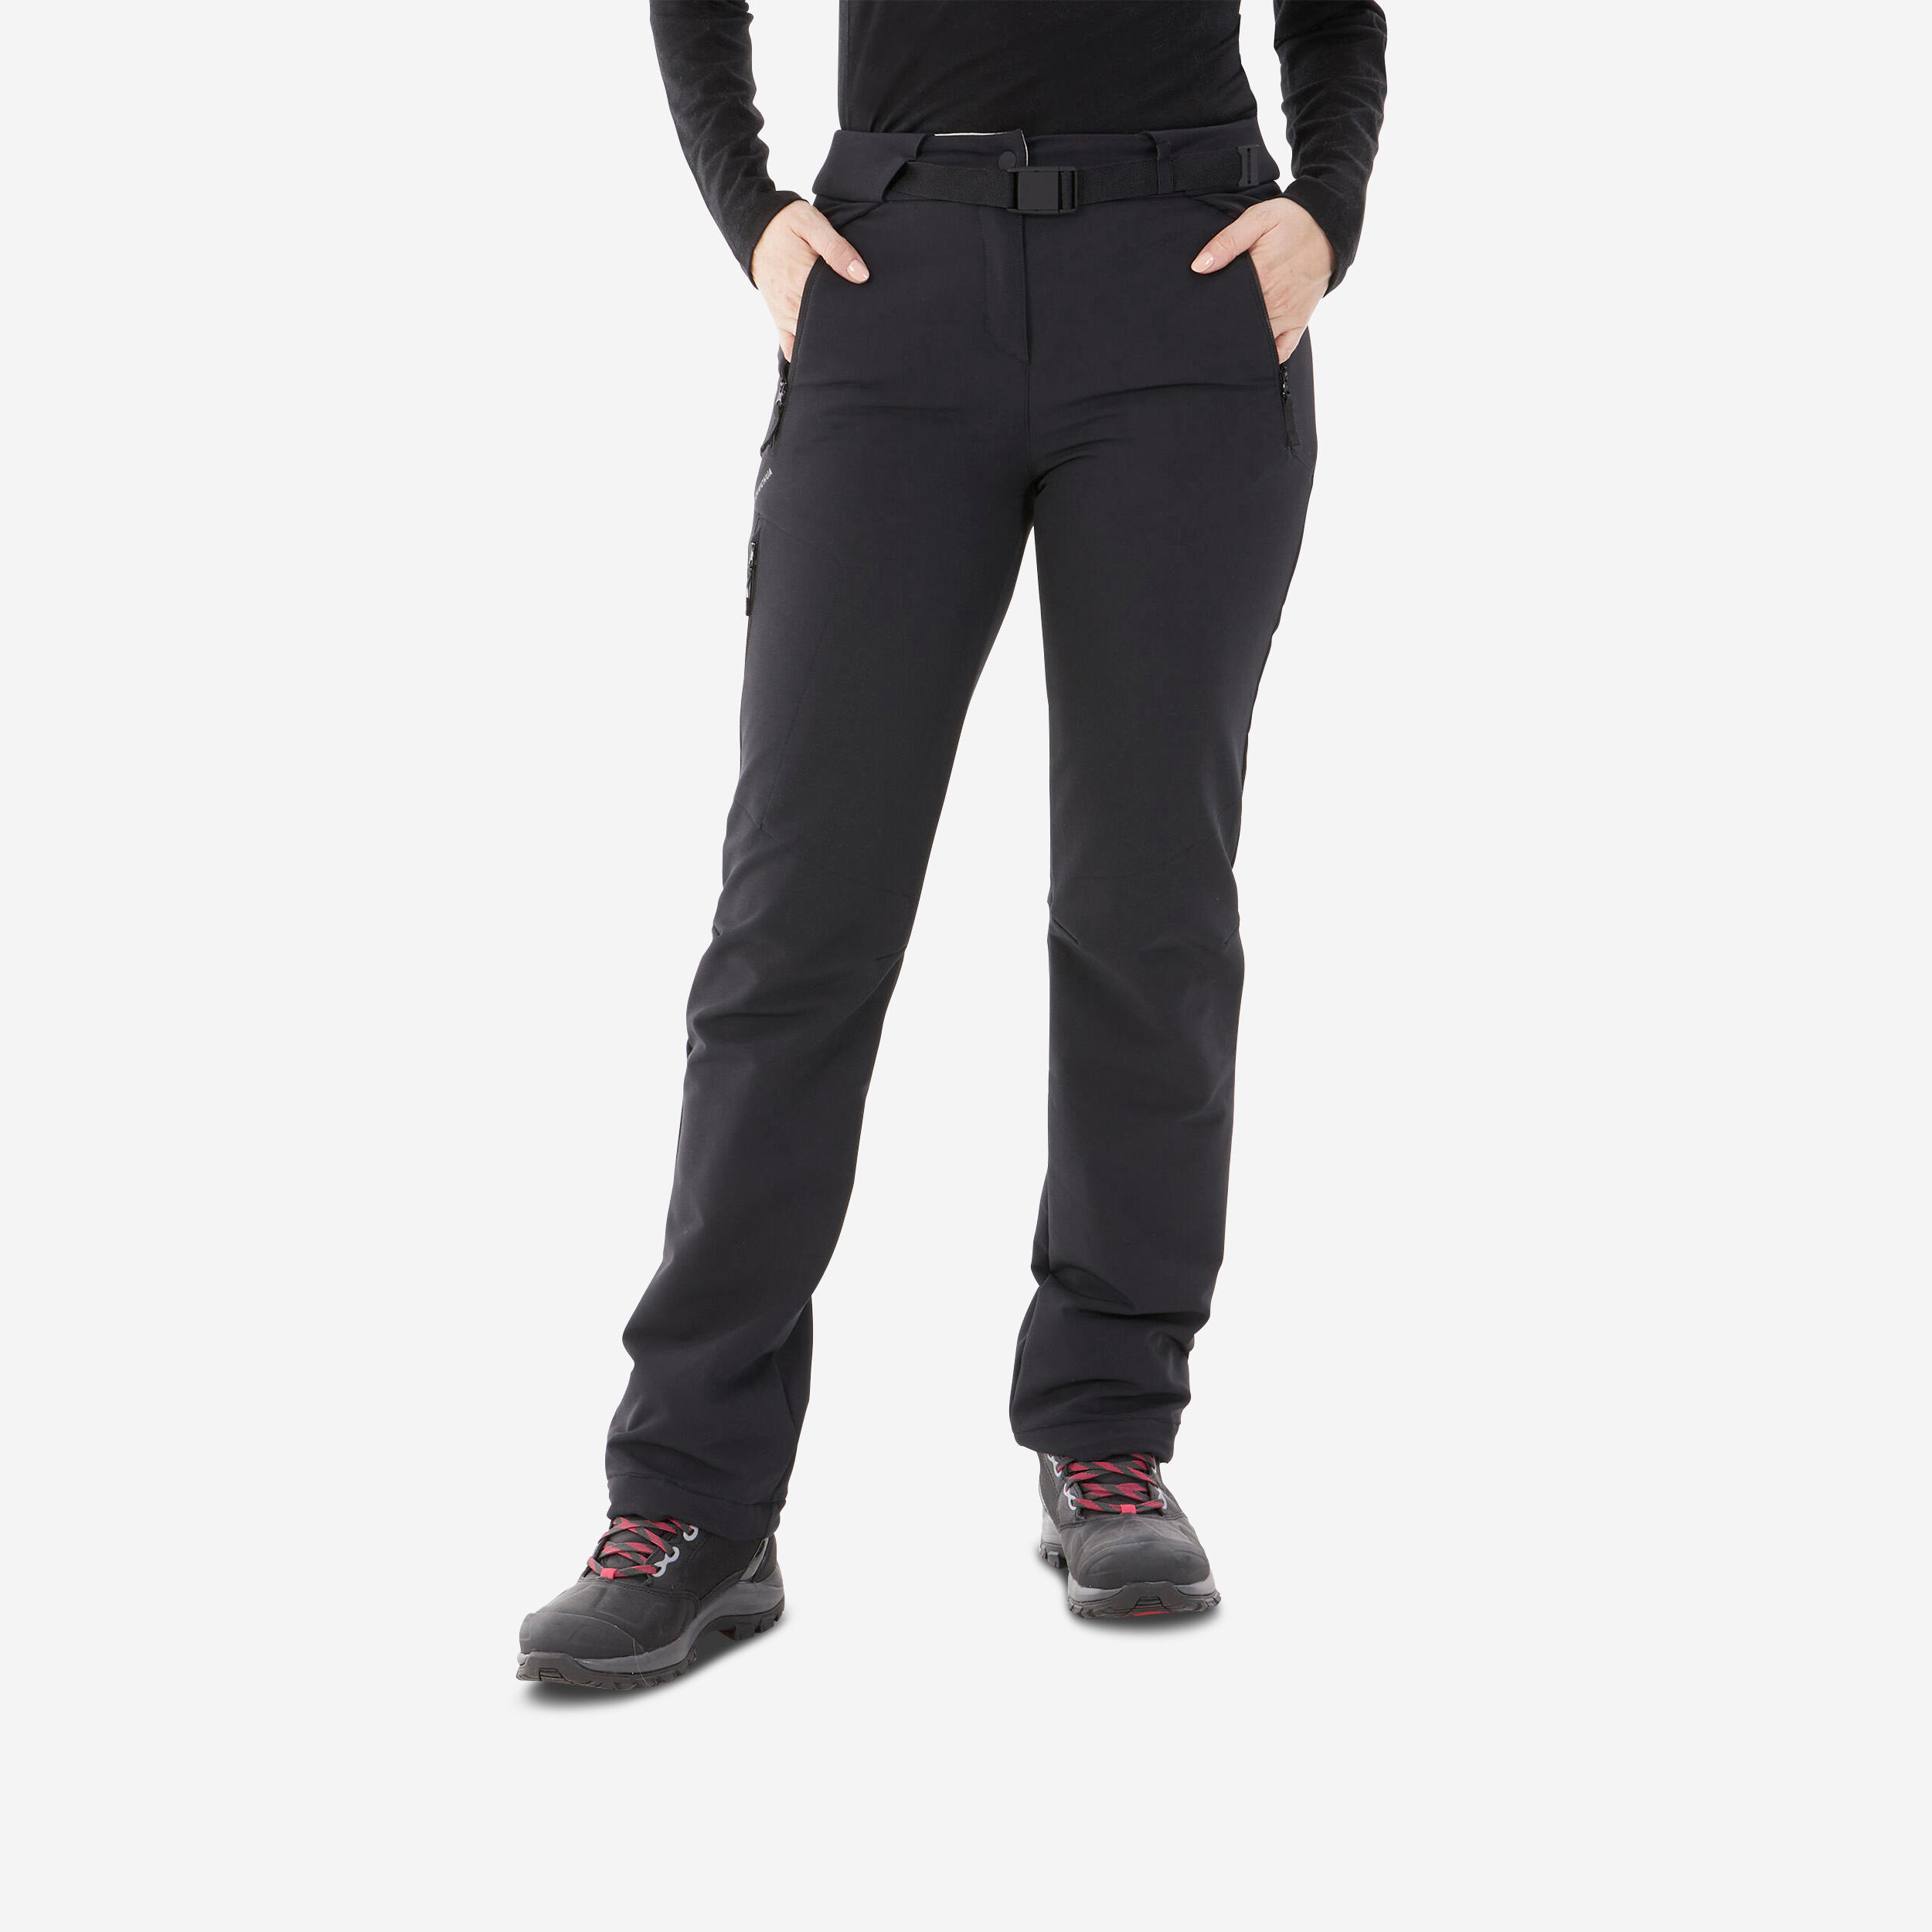 Buy Decathlon Ski Warm Black Trousers from the Next UK online shop